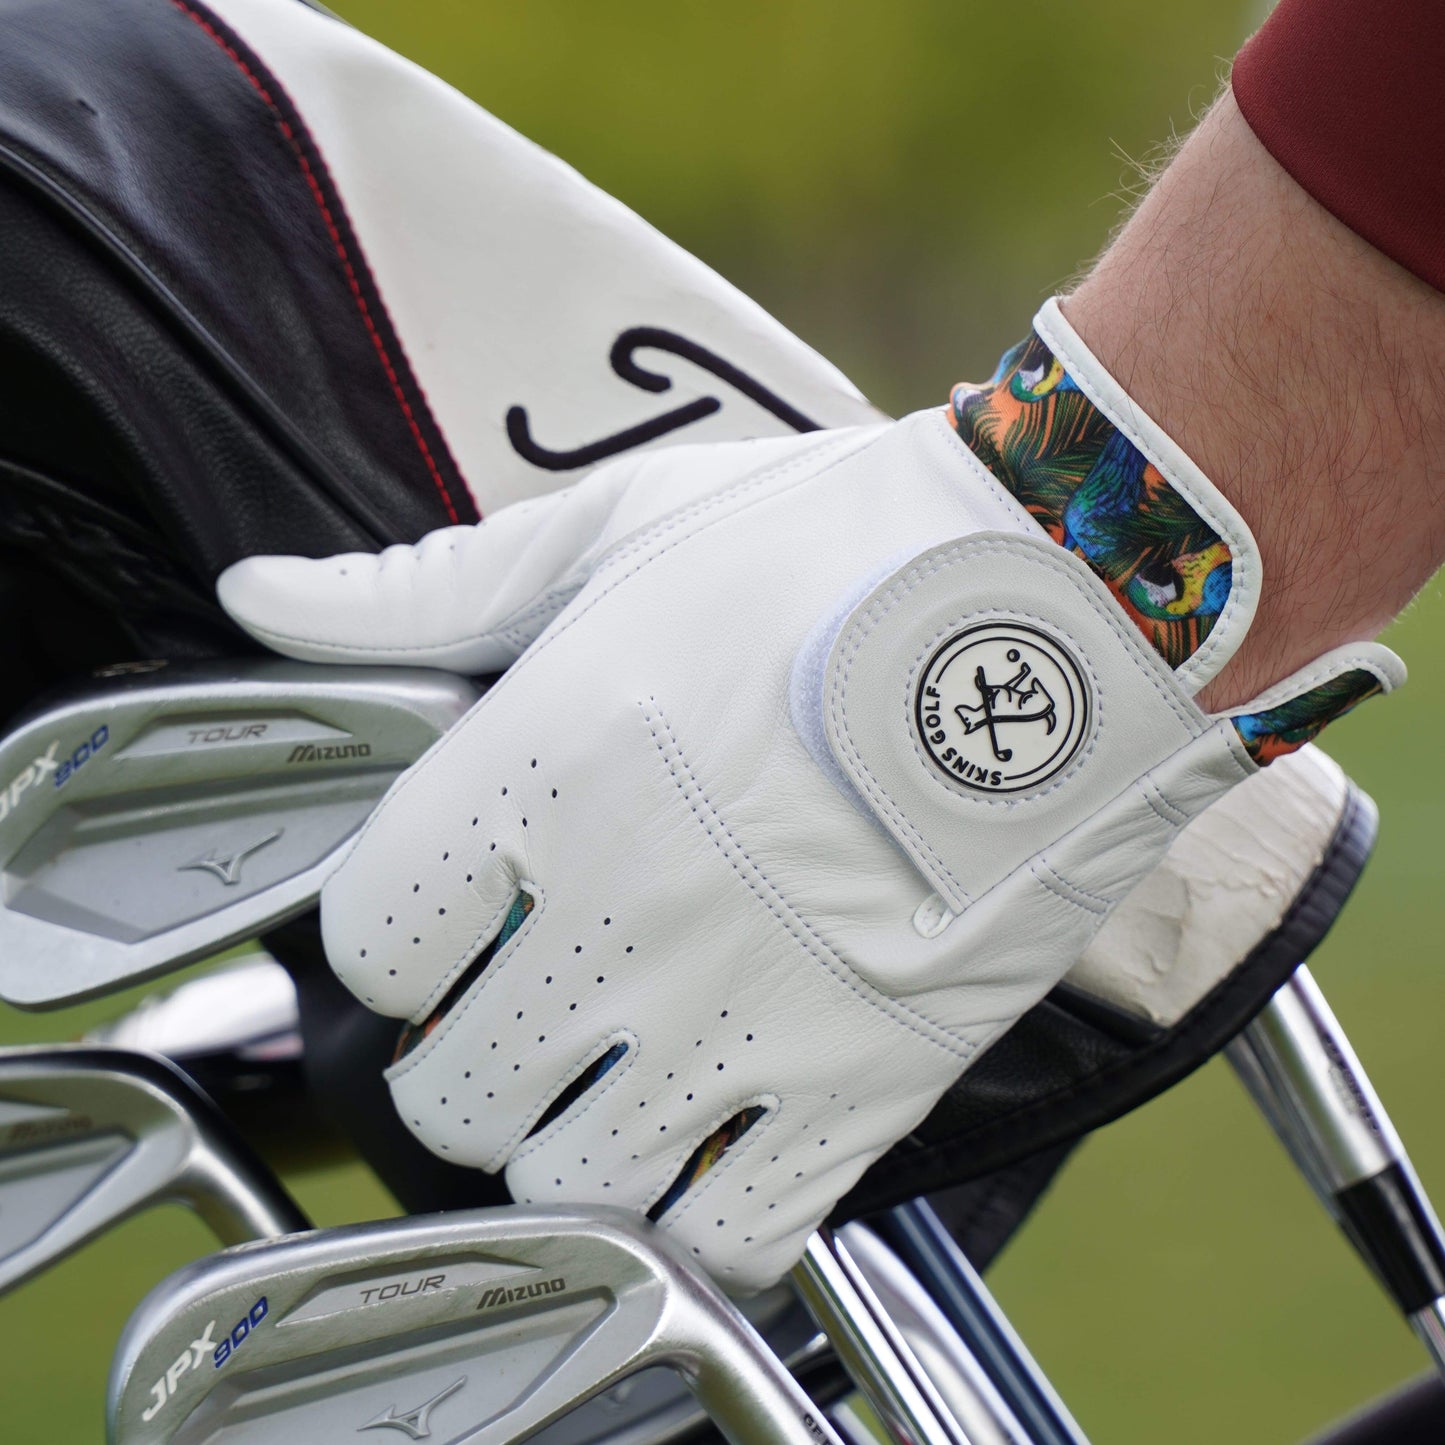 Golf glove with Tropical design